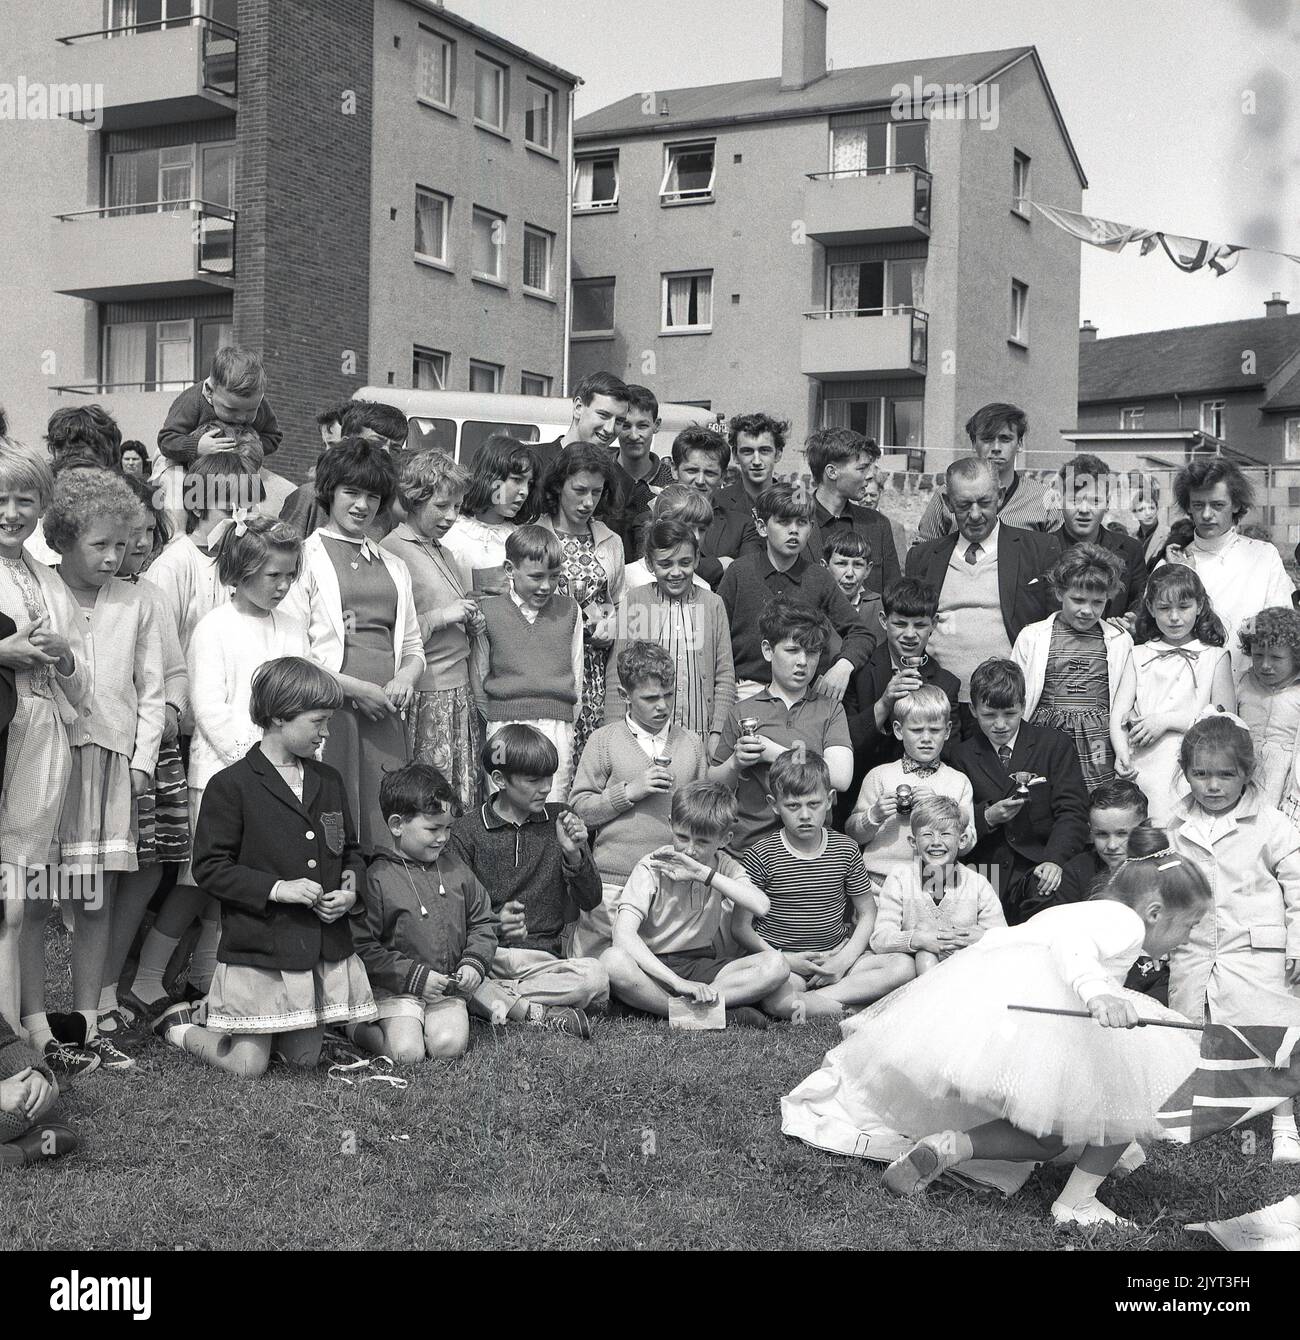 1965, historical, children and adults gathered for a group picture, some holding miniature trophies, after taking part in the North Queensferry gala day, a community day for the estates residents, North Queensferry, Fife, Scotland, UK. Stock Photo